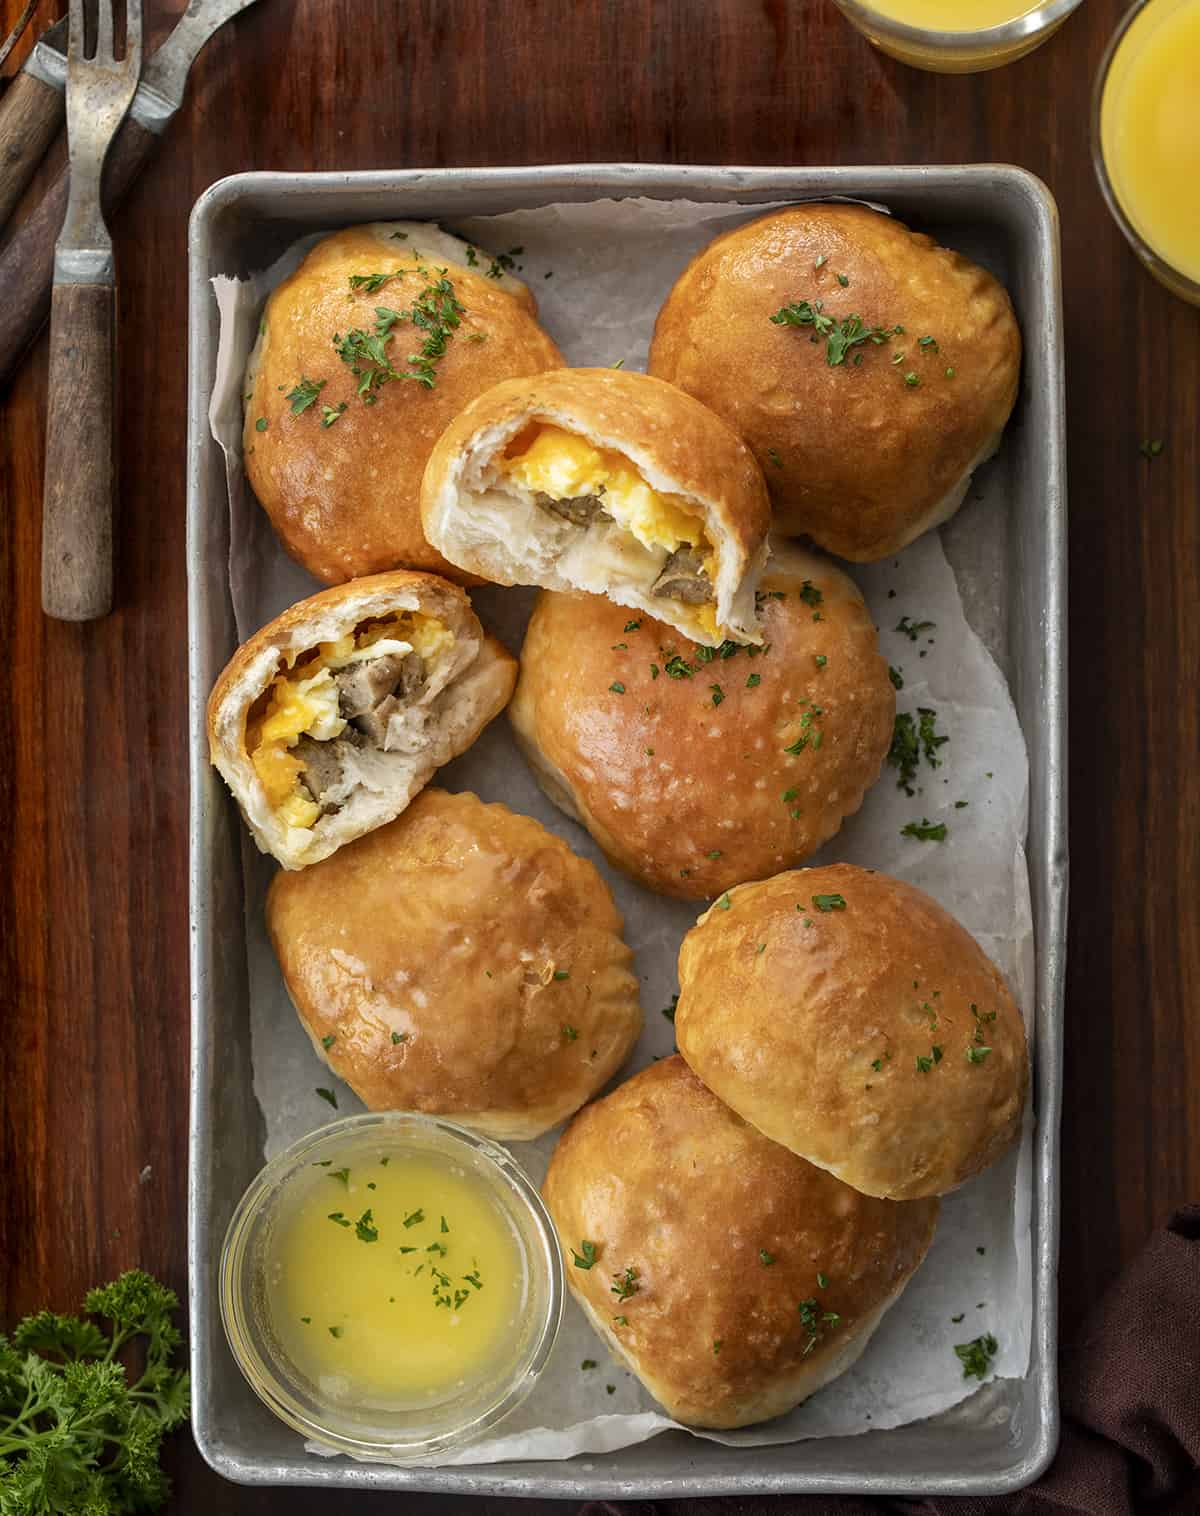 Pan of Breakfast Bombs with Melted Butter and Halved Breakfast Bomb Showing Inside. Breakfast, Easy Breakfast, Kid Breakfast, Breakfast Ideas, Sausage and Egg Breakfast, Sausage Egg Cheese Breakfast, Hot Breakfast, Brunch, Brunch IDeas, brunch recipes, i am homesteader, iamhomesteader